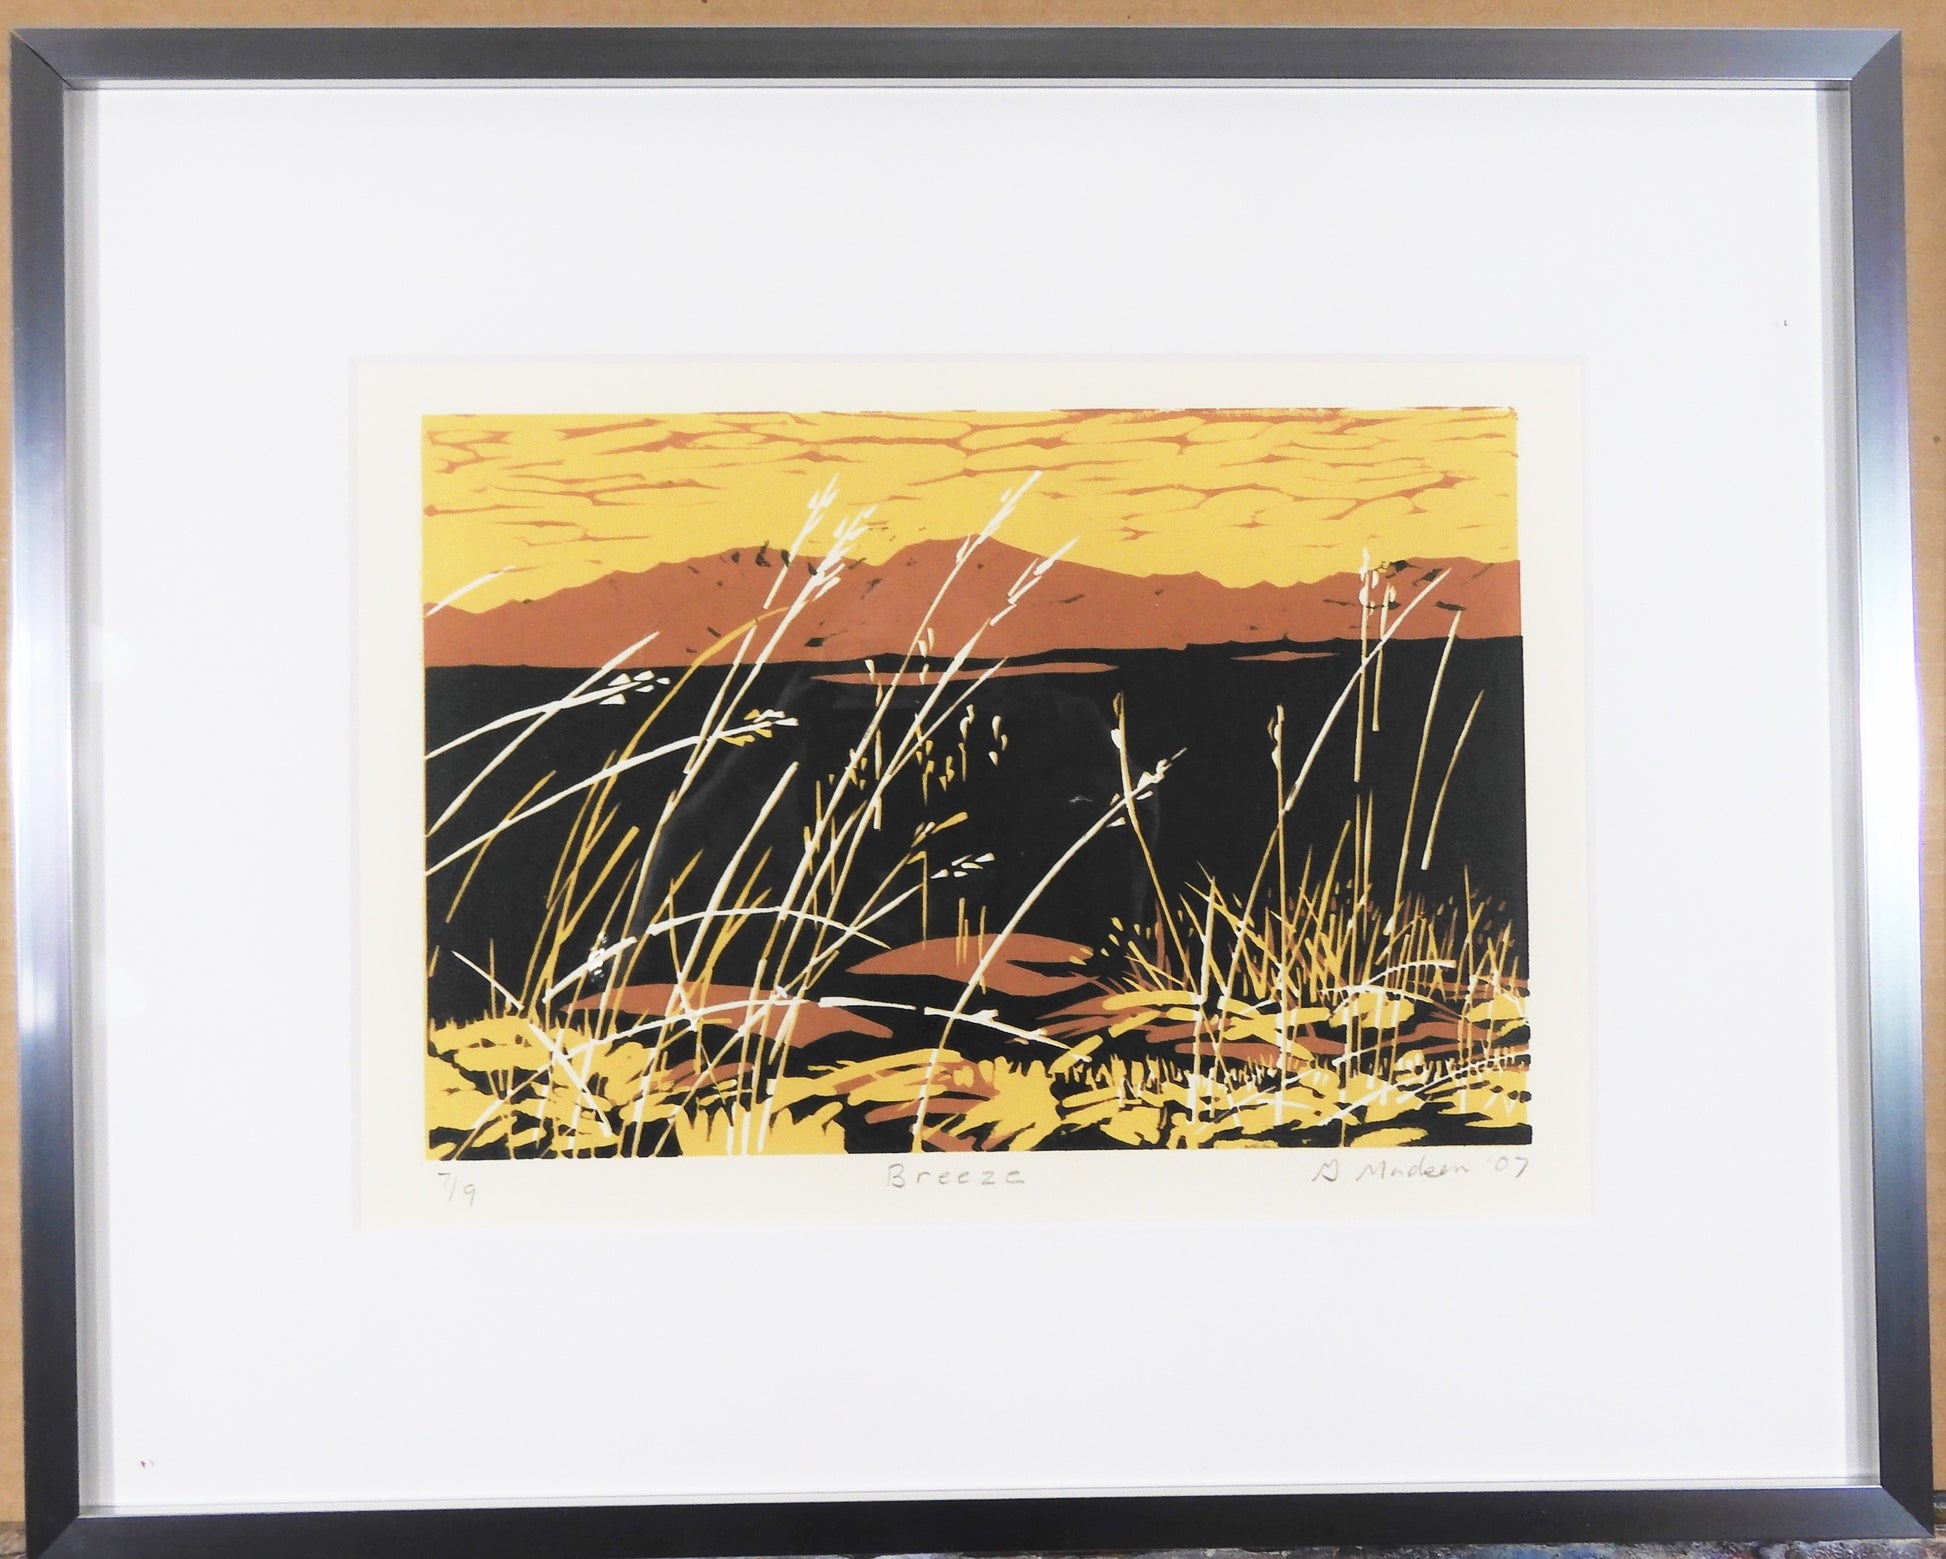 silver metal framed relief print. grasses waving in the breeze in the foreground. Orange mountain silhouette in the background.